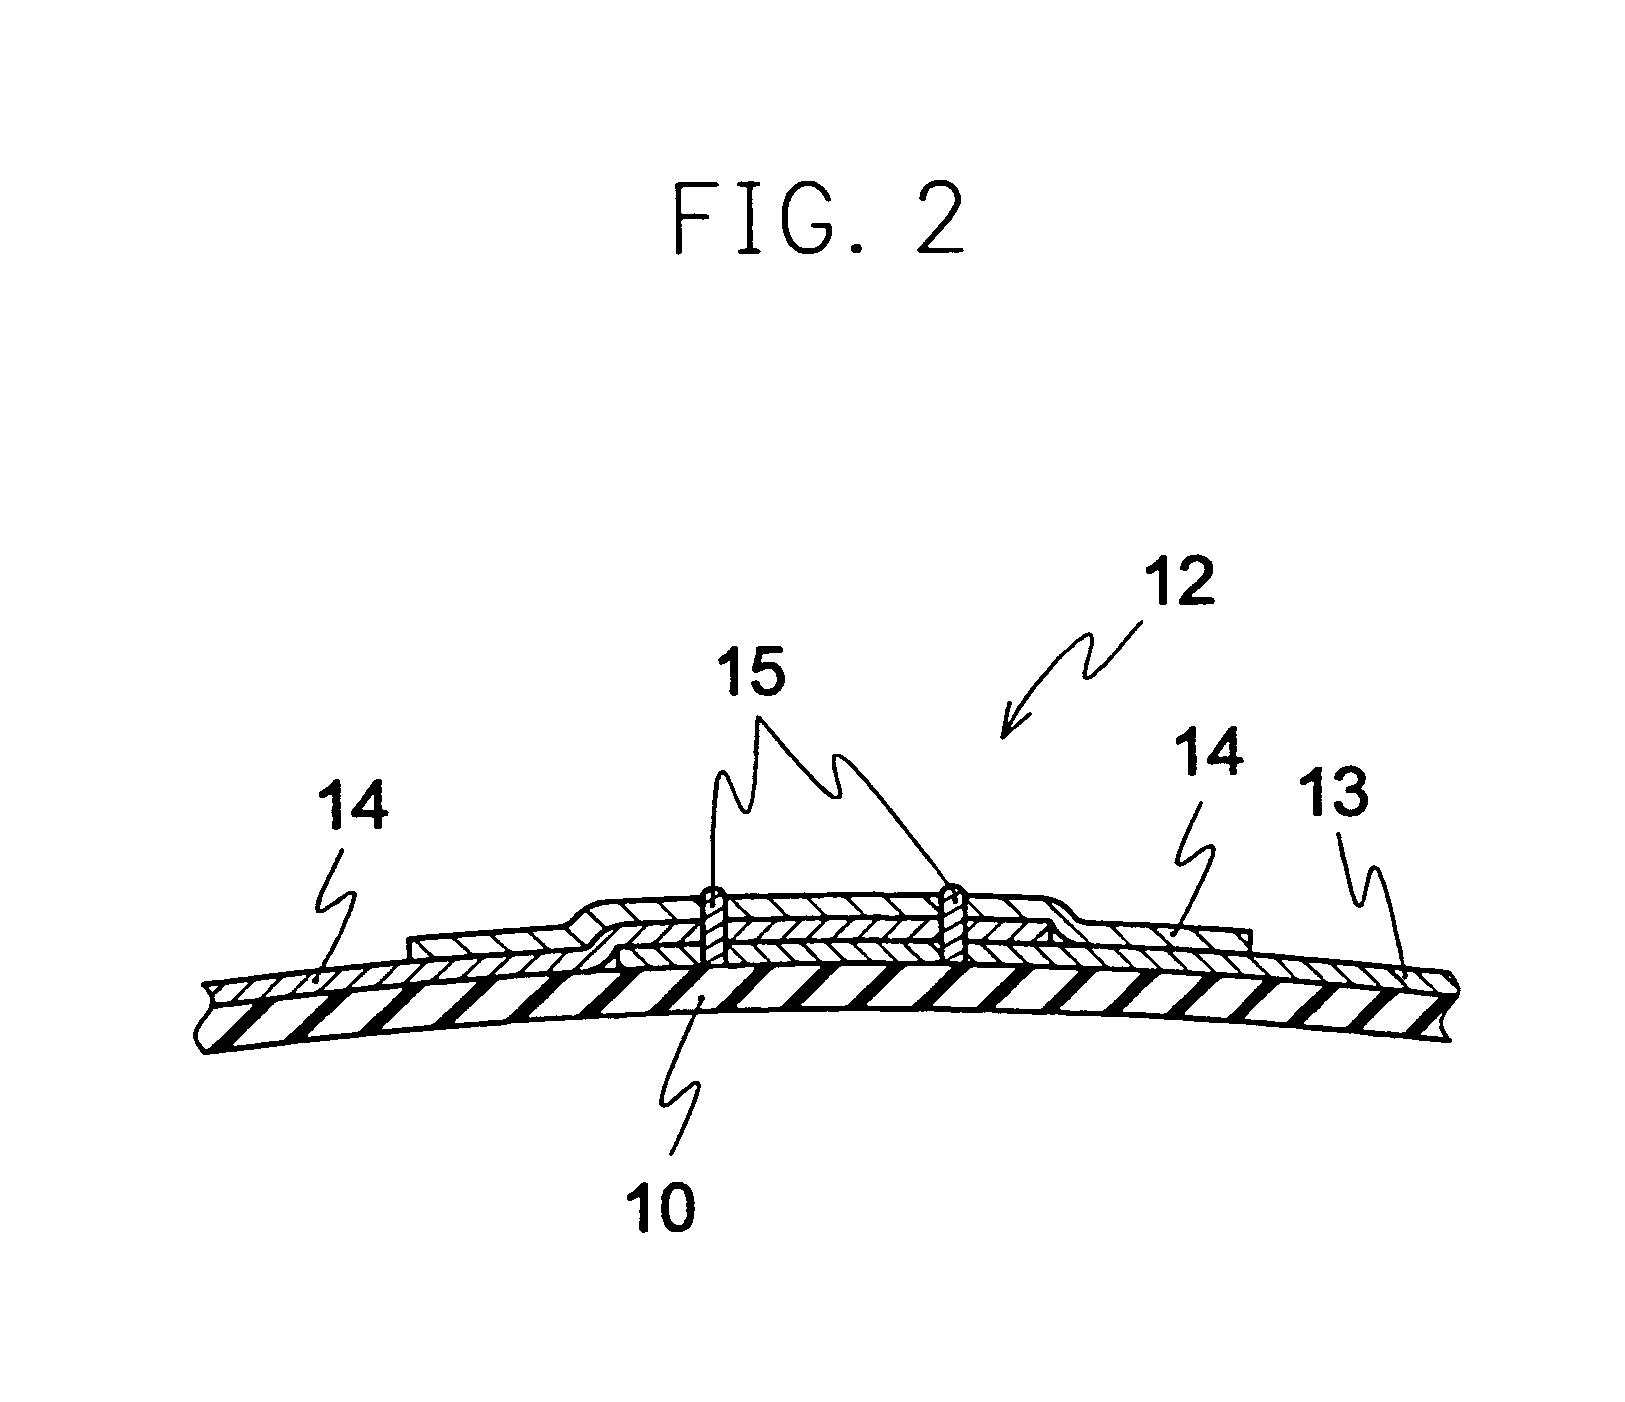 Ball for ball game and method for manufacturing the same